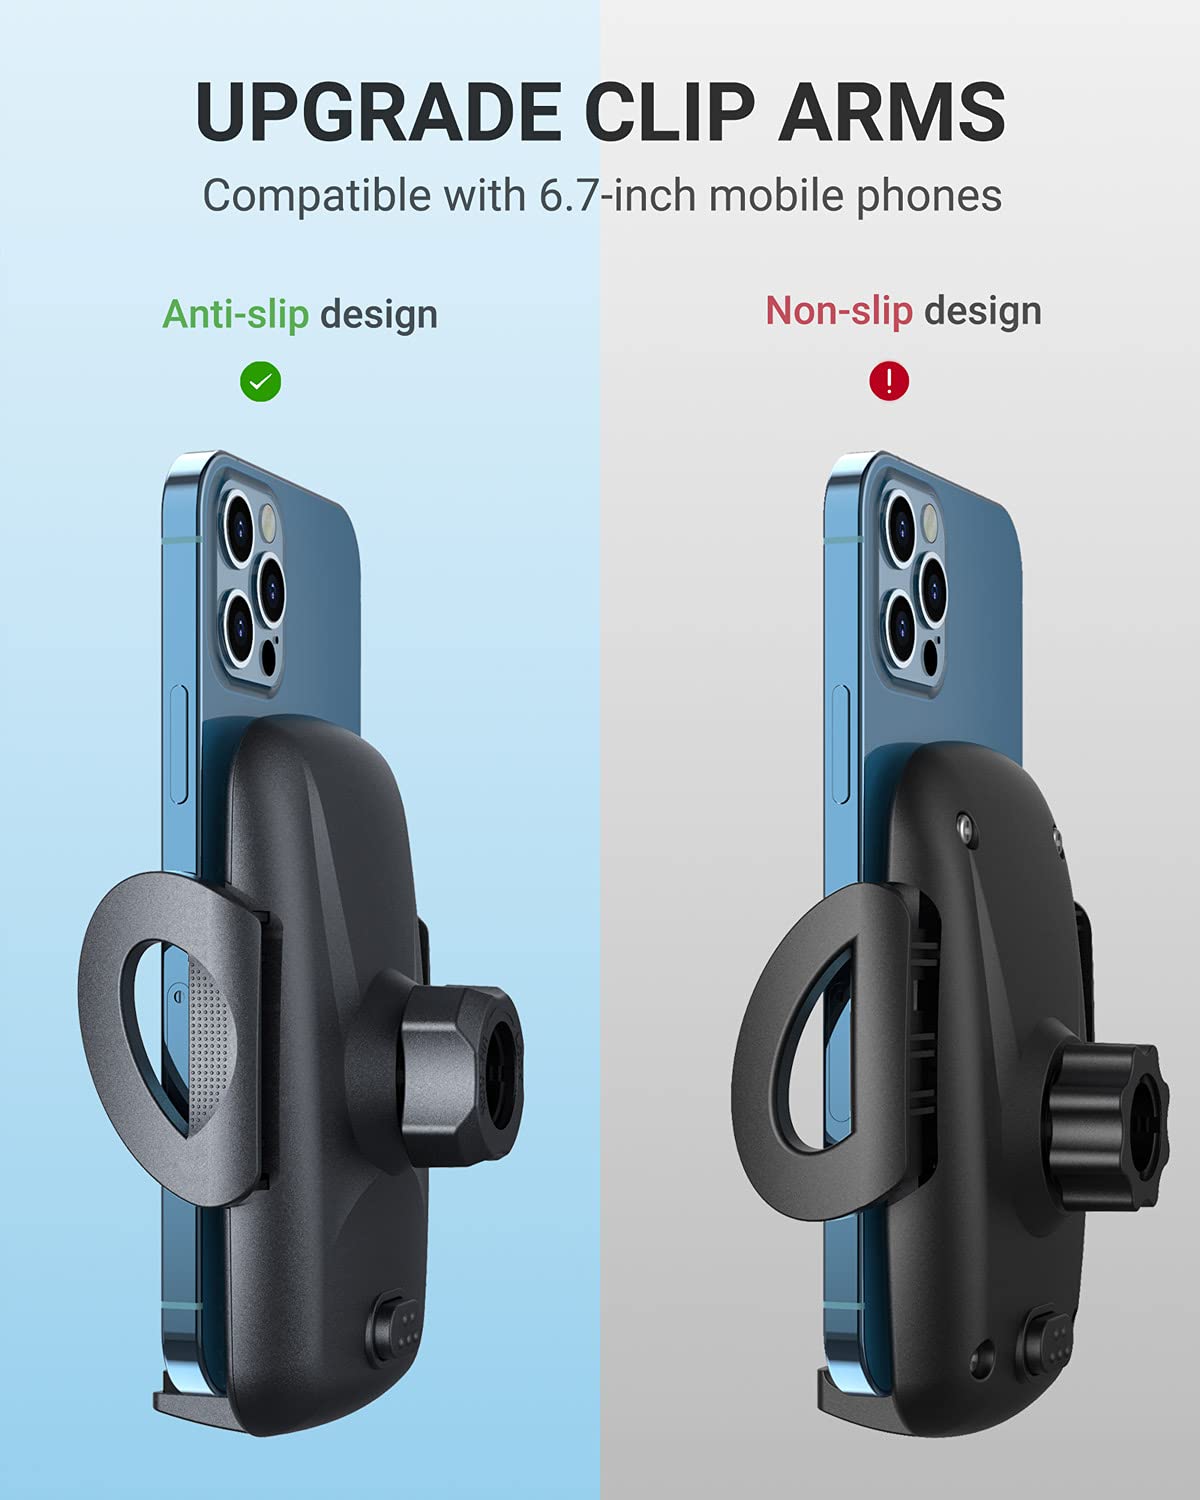 Areker Car Mobile Phone Car Holder Universal Air Vent Car Holder 360 Degree Rotation 2-level Adjustable Car Cradle Mount iPhone X 8 7 7 Plus 6s SE Samsung S8 Plus S7 HTC Huawei and More - Quntis